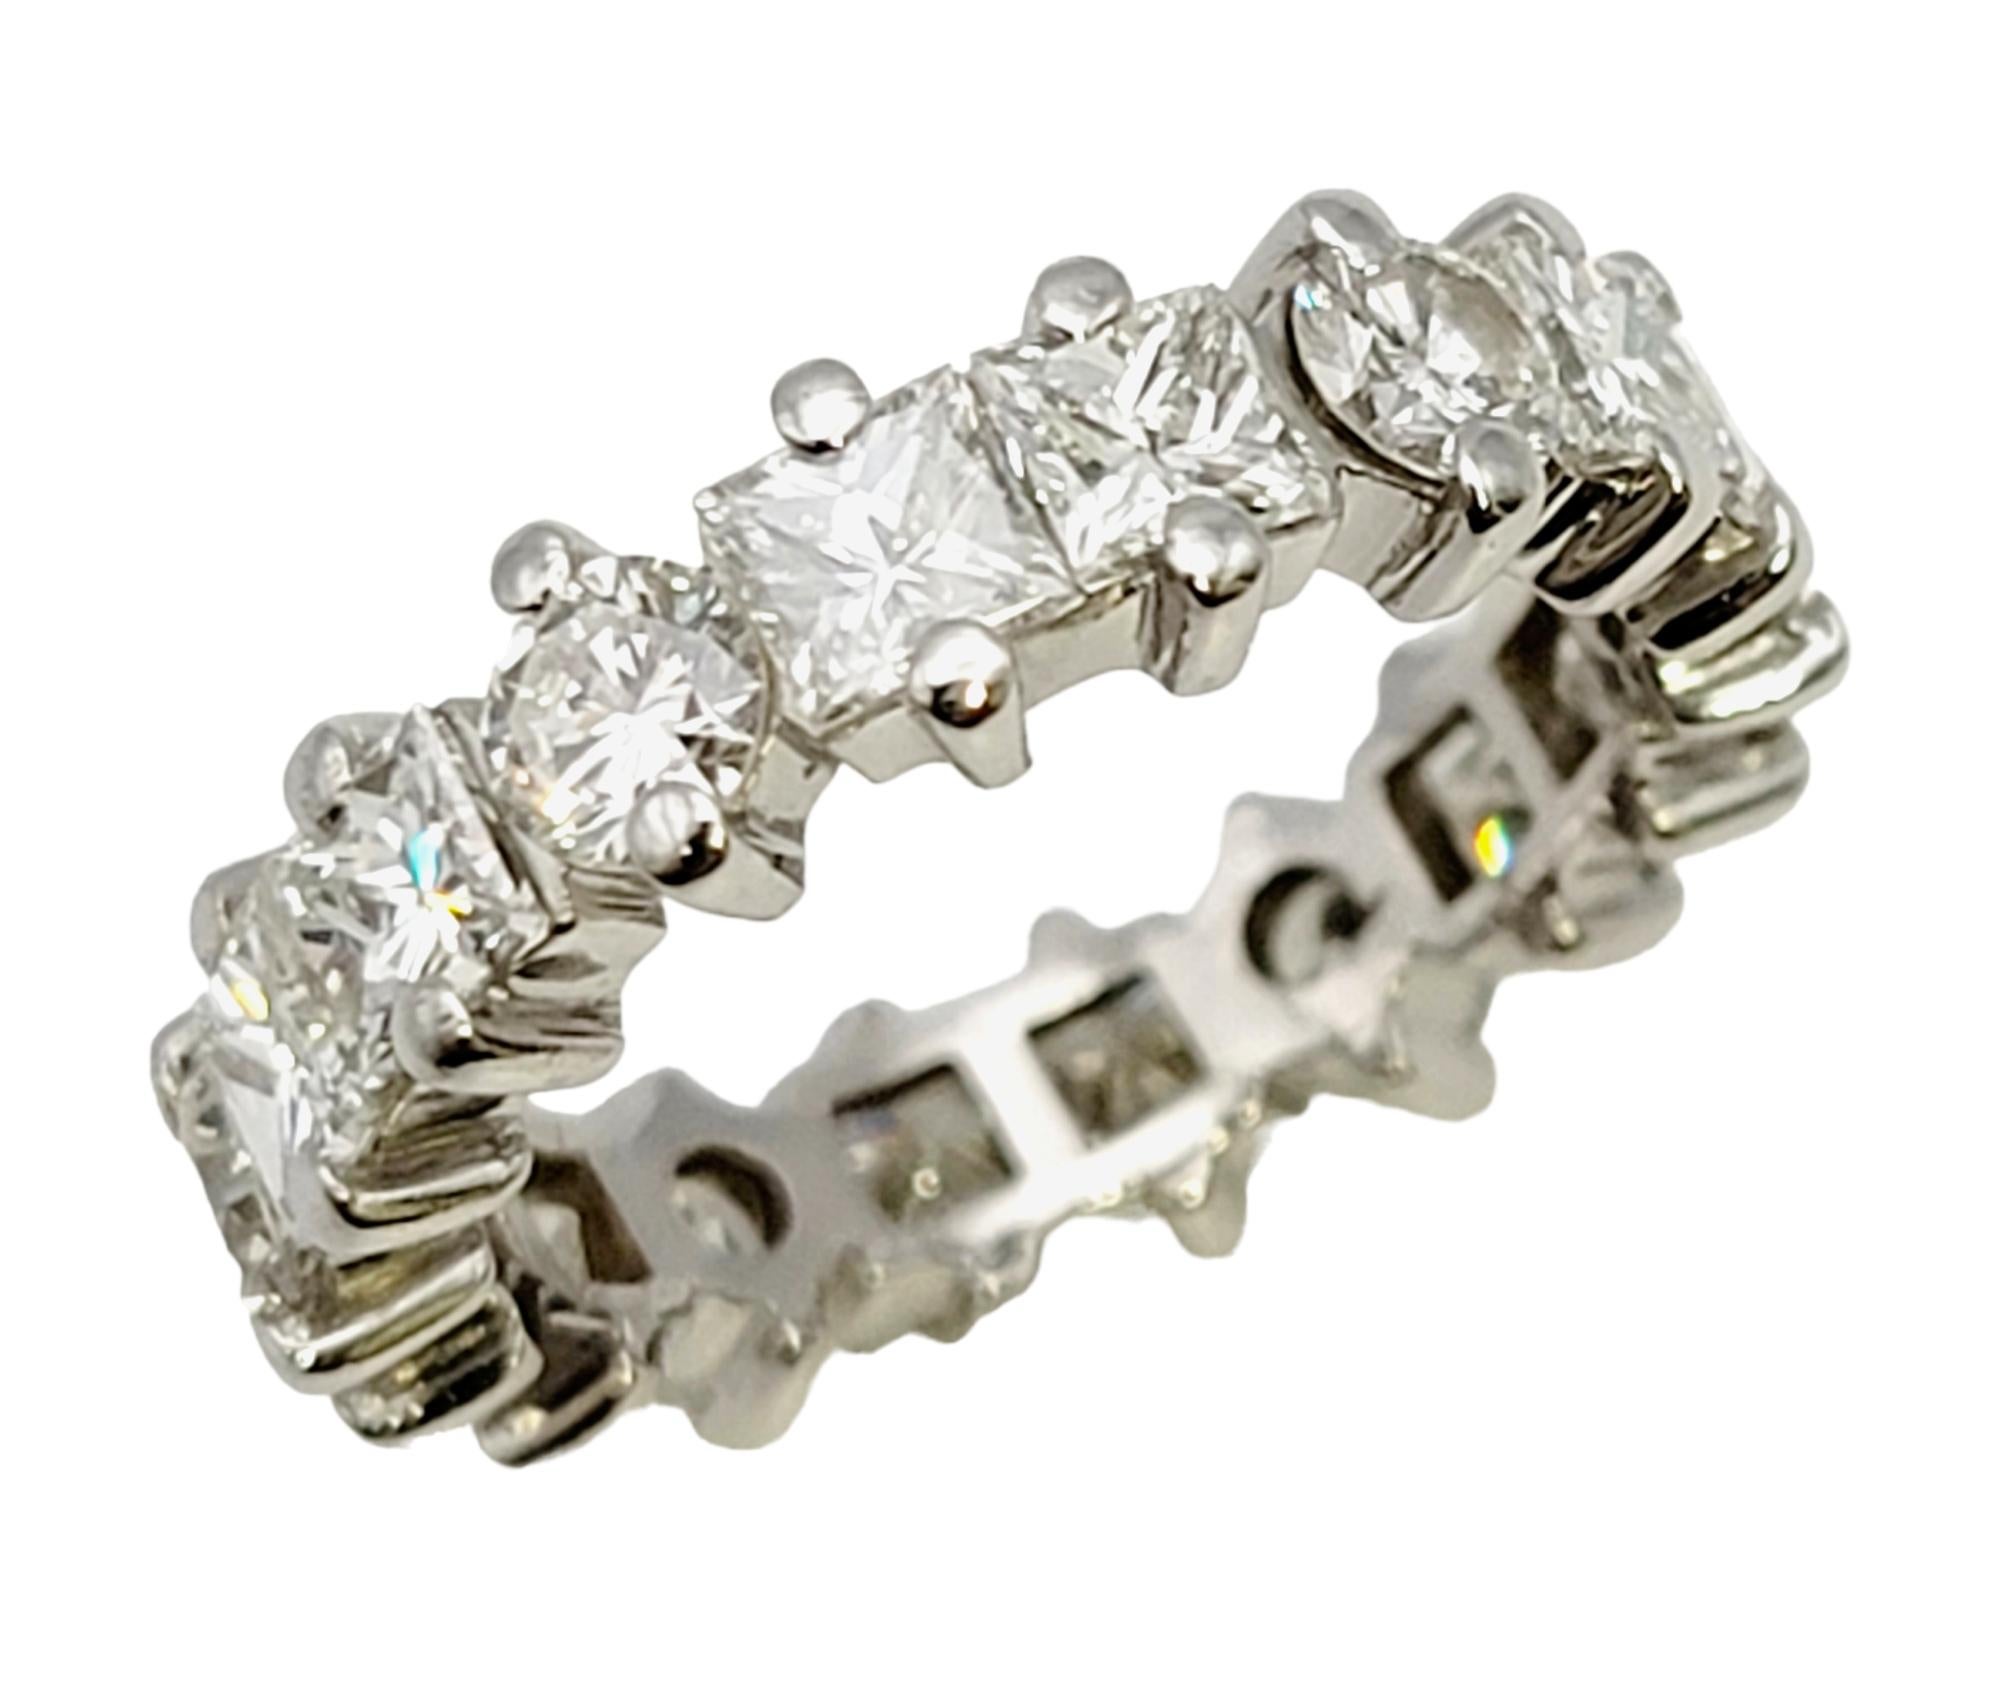 Ring size: 5.75

Absolutely gorgeous diamond eternity band ring. This remarkable ring features a full circle of icy white diamonds that truly shimmer and shine from every angle. The slightly wider band style also enhances the incredible sparkle,